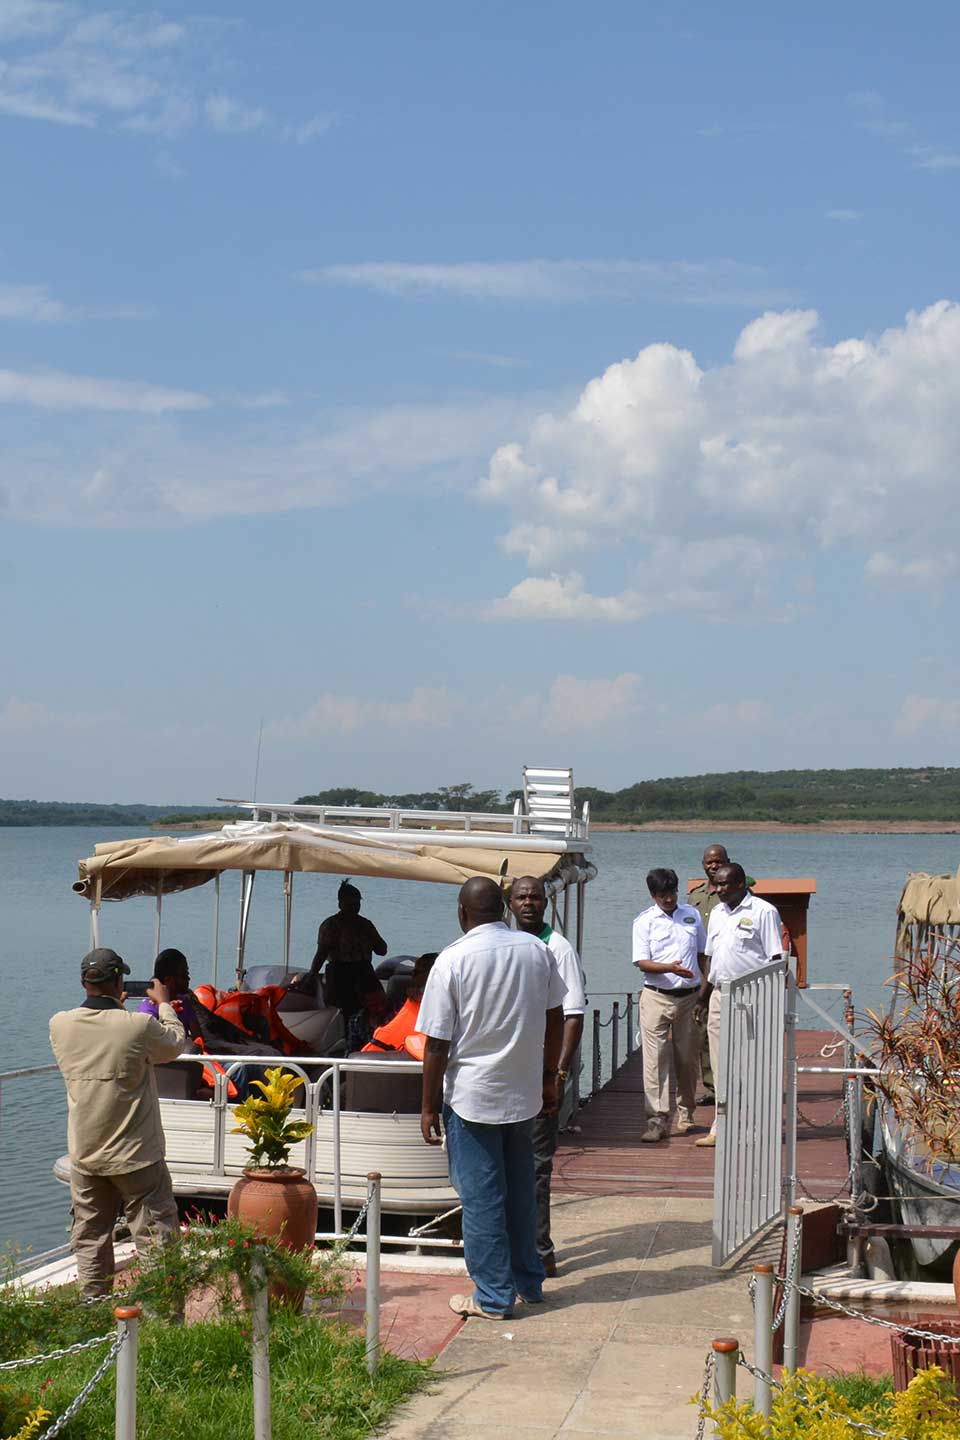 A boat safari on the Kazinga Channel in the Queen Elizabeth National Park brings you close to the wildlife